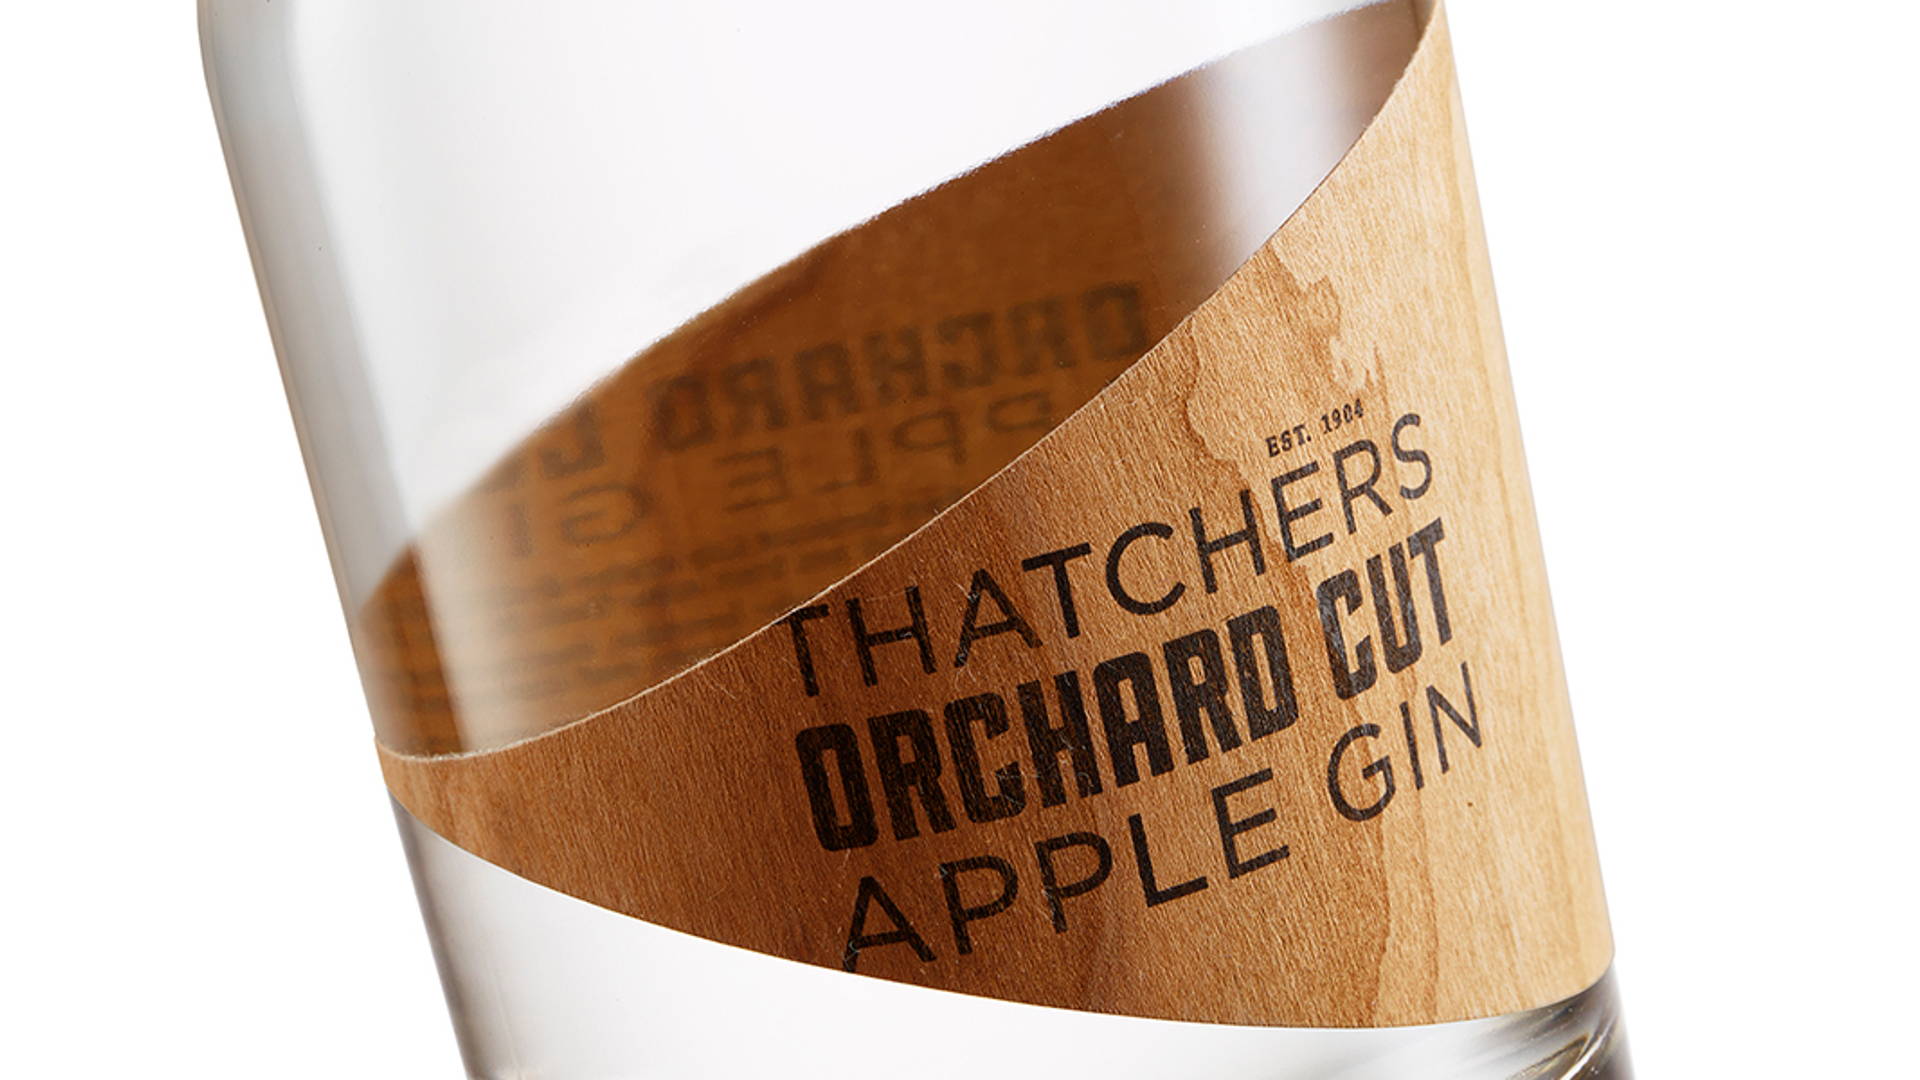 Featured image for Thatchers Orchard Cut Apple Gin